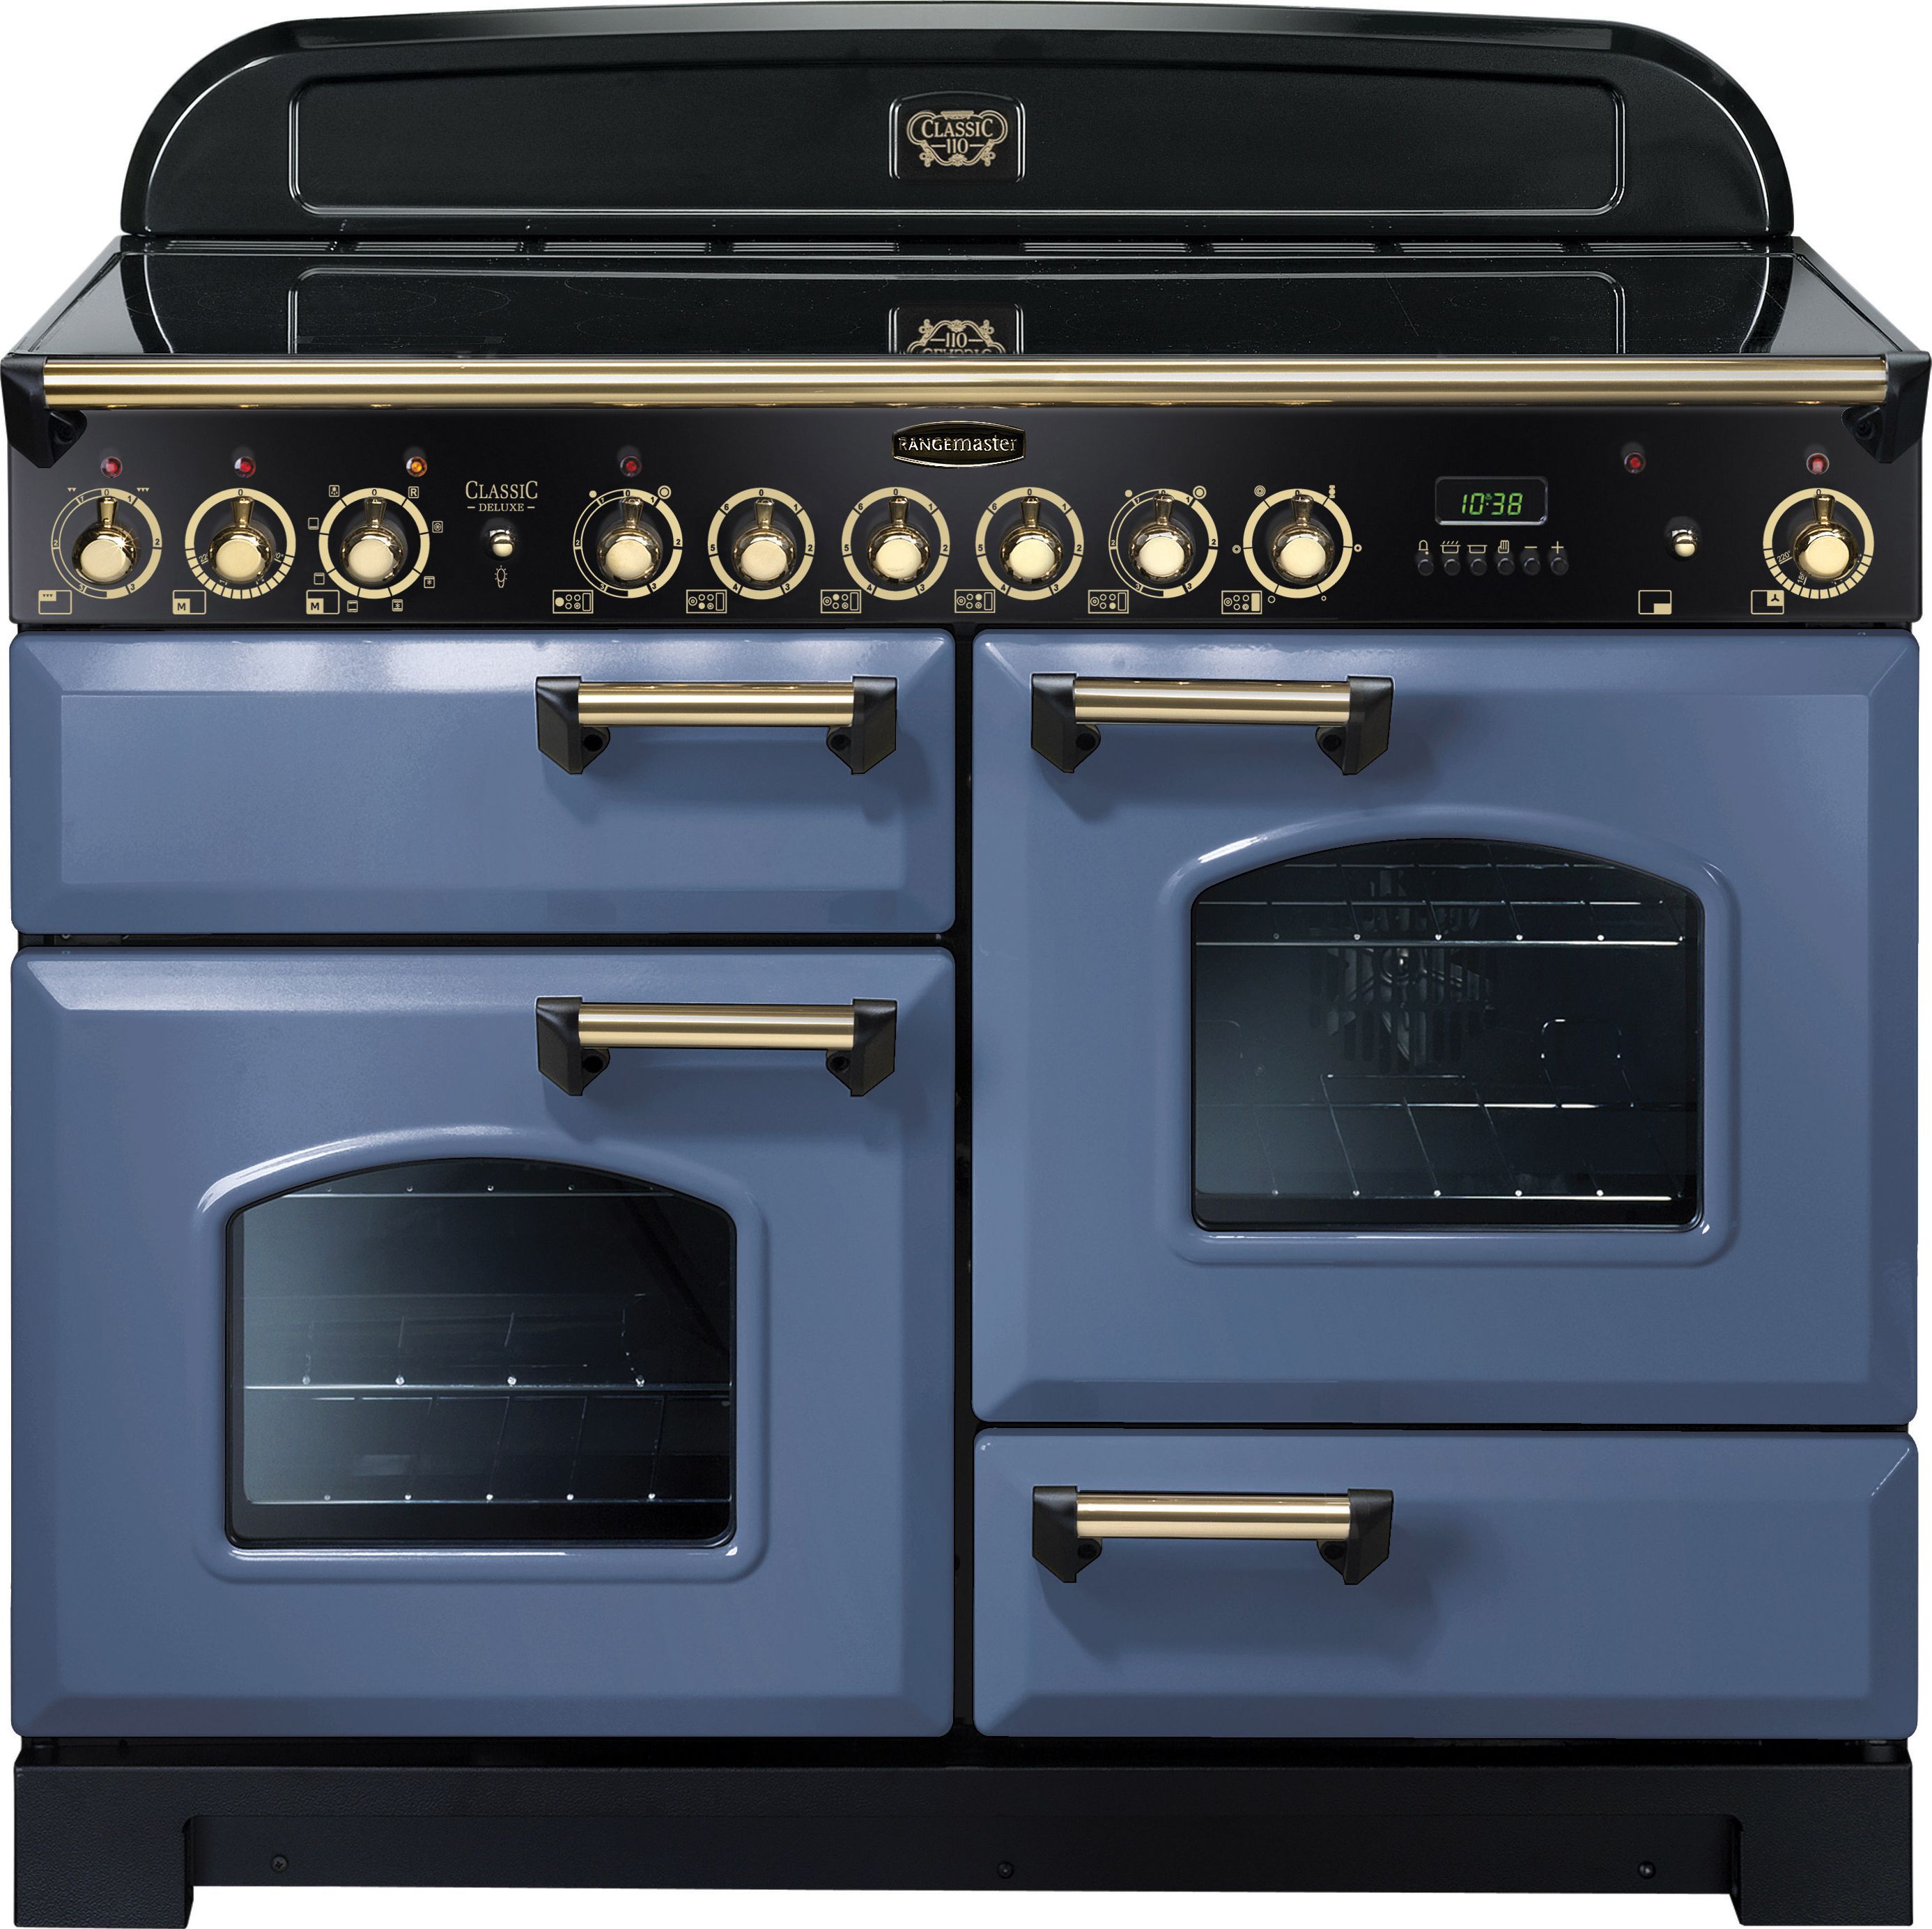 Rangemaster Classic Deluxe CDL110ECSB/B 110cm Electric Range Cooker with Ceramic Hob - Stone Blue / Brass - A/A Rated, Blue